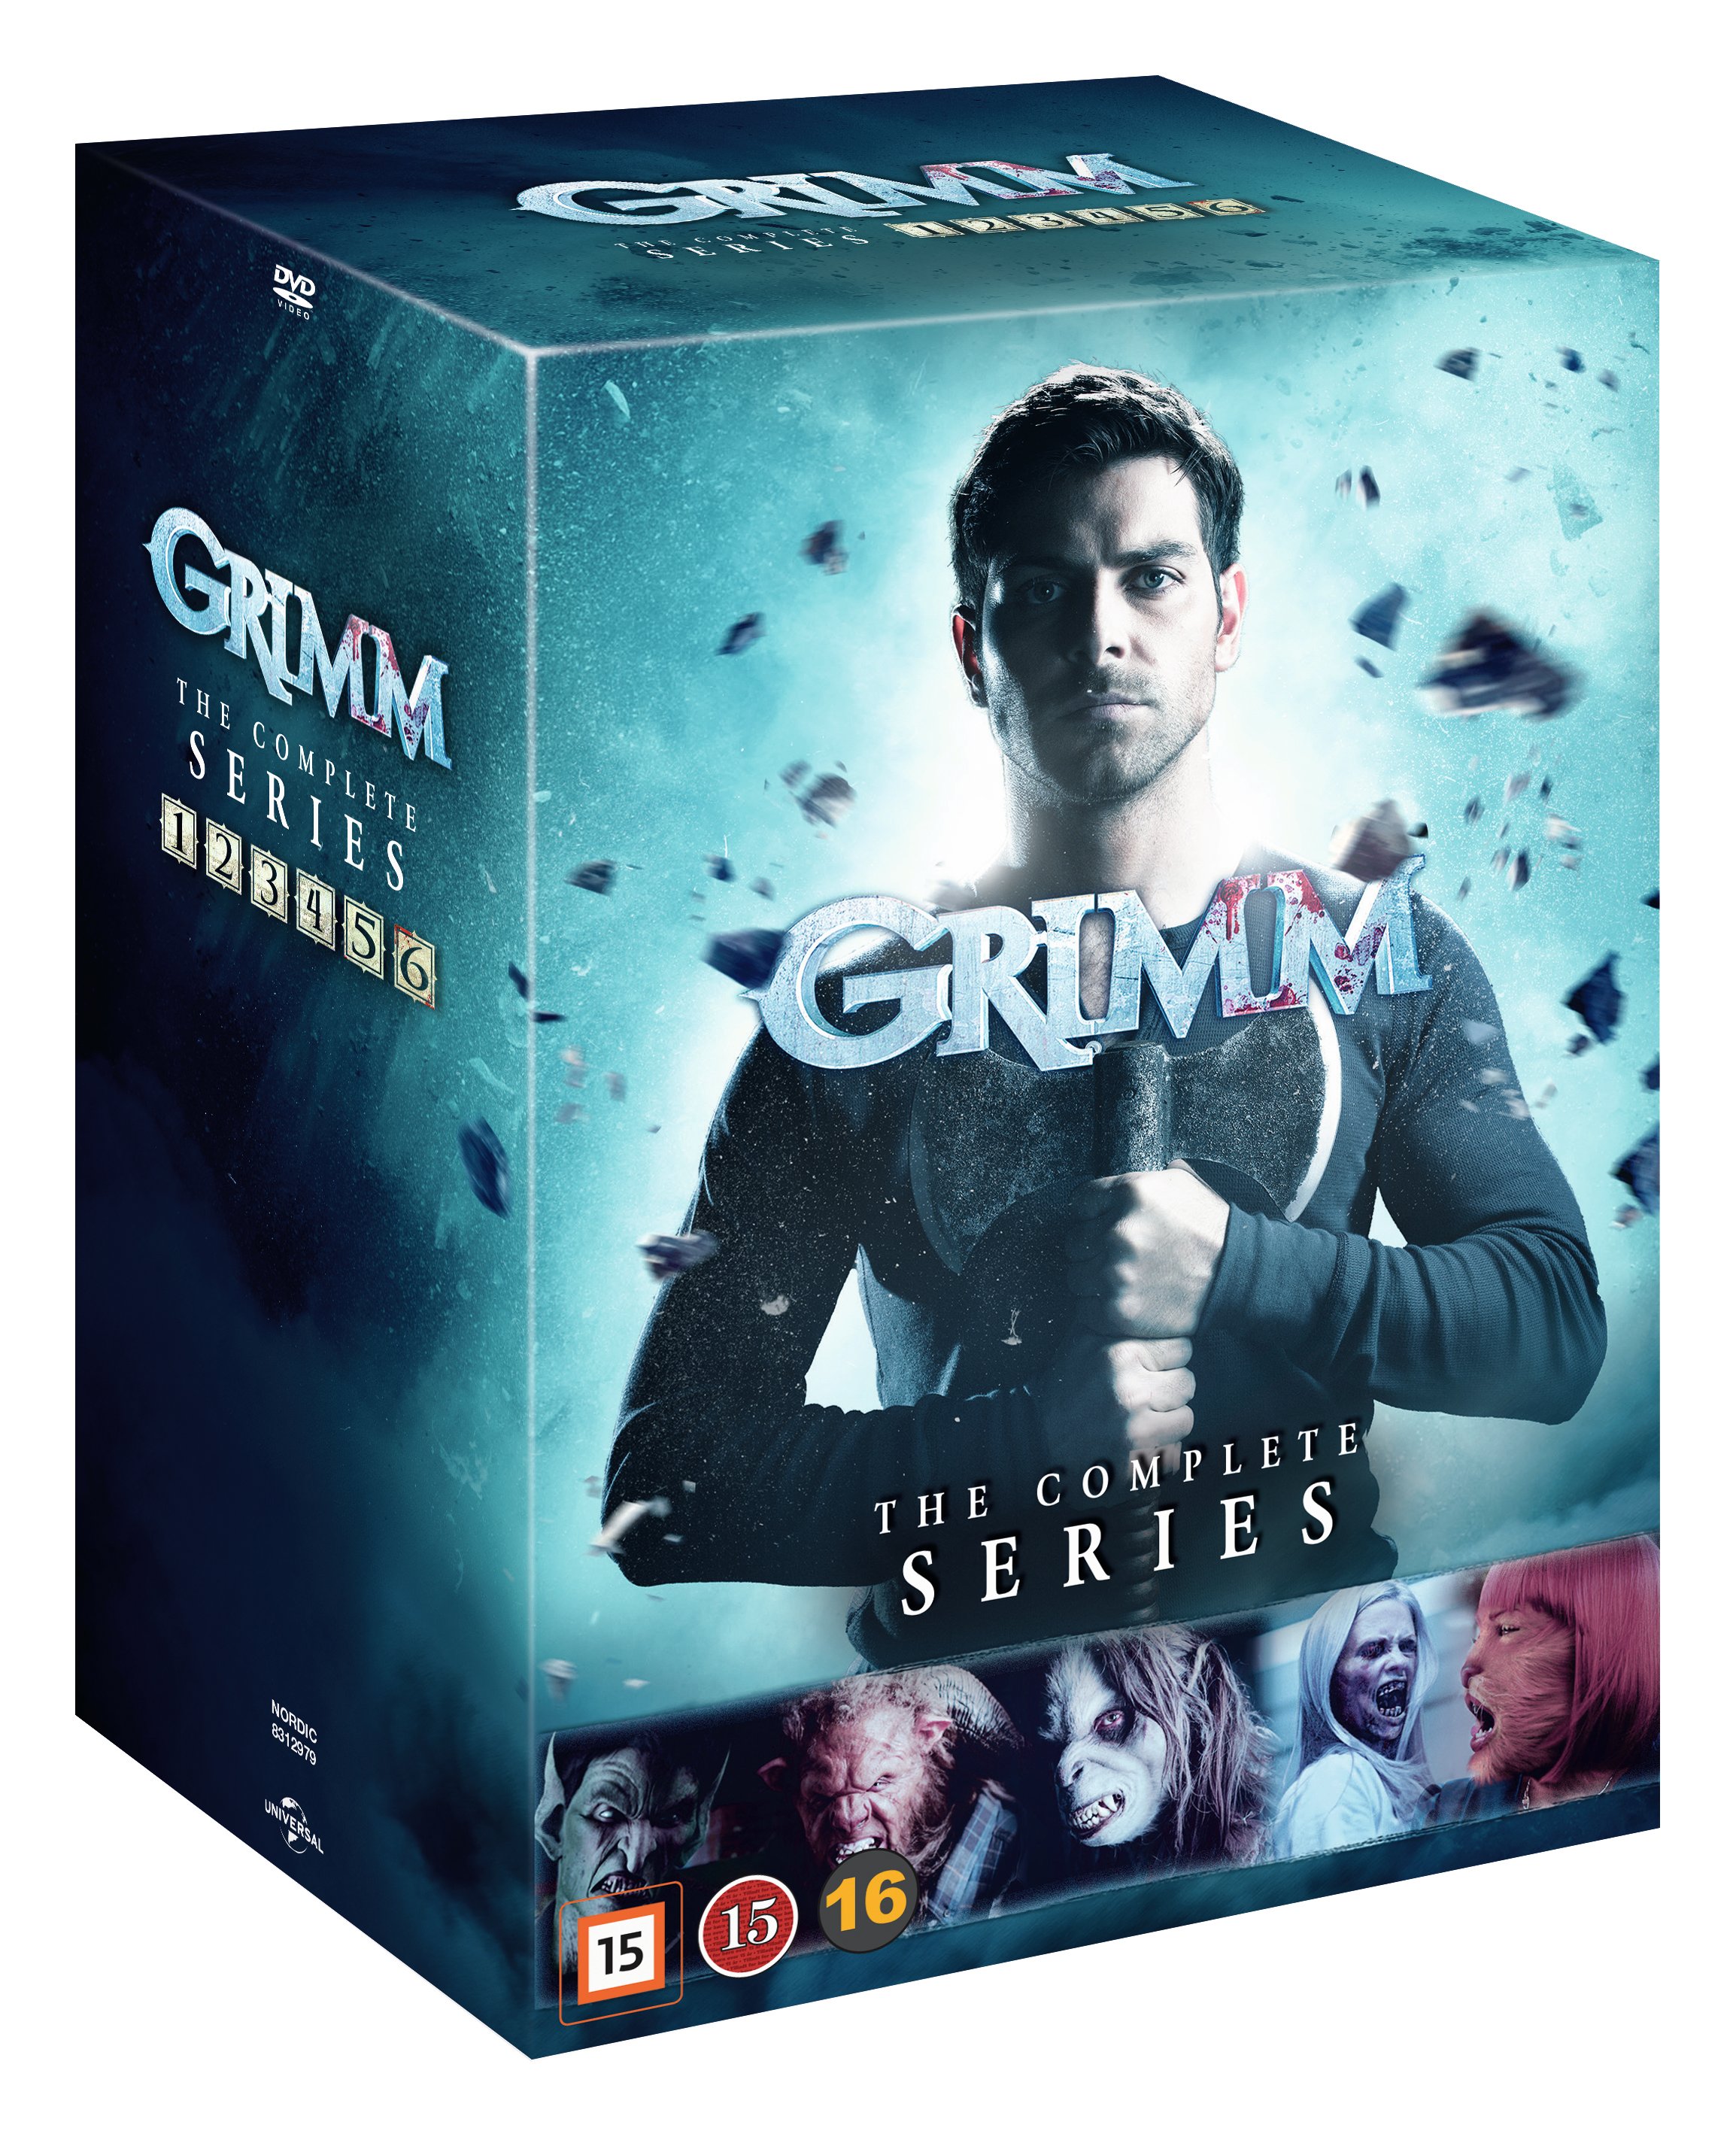 Grimm: The Complete Series